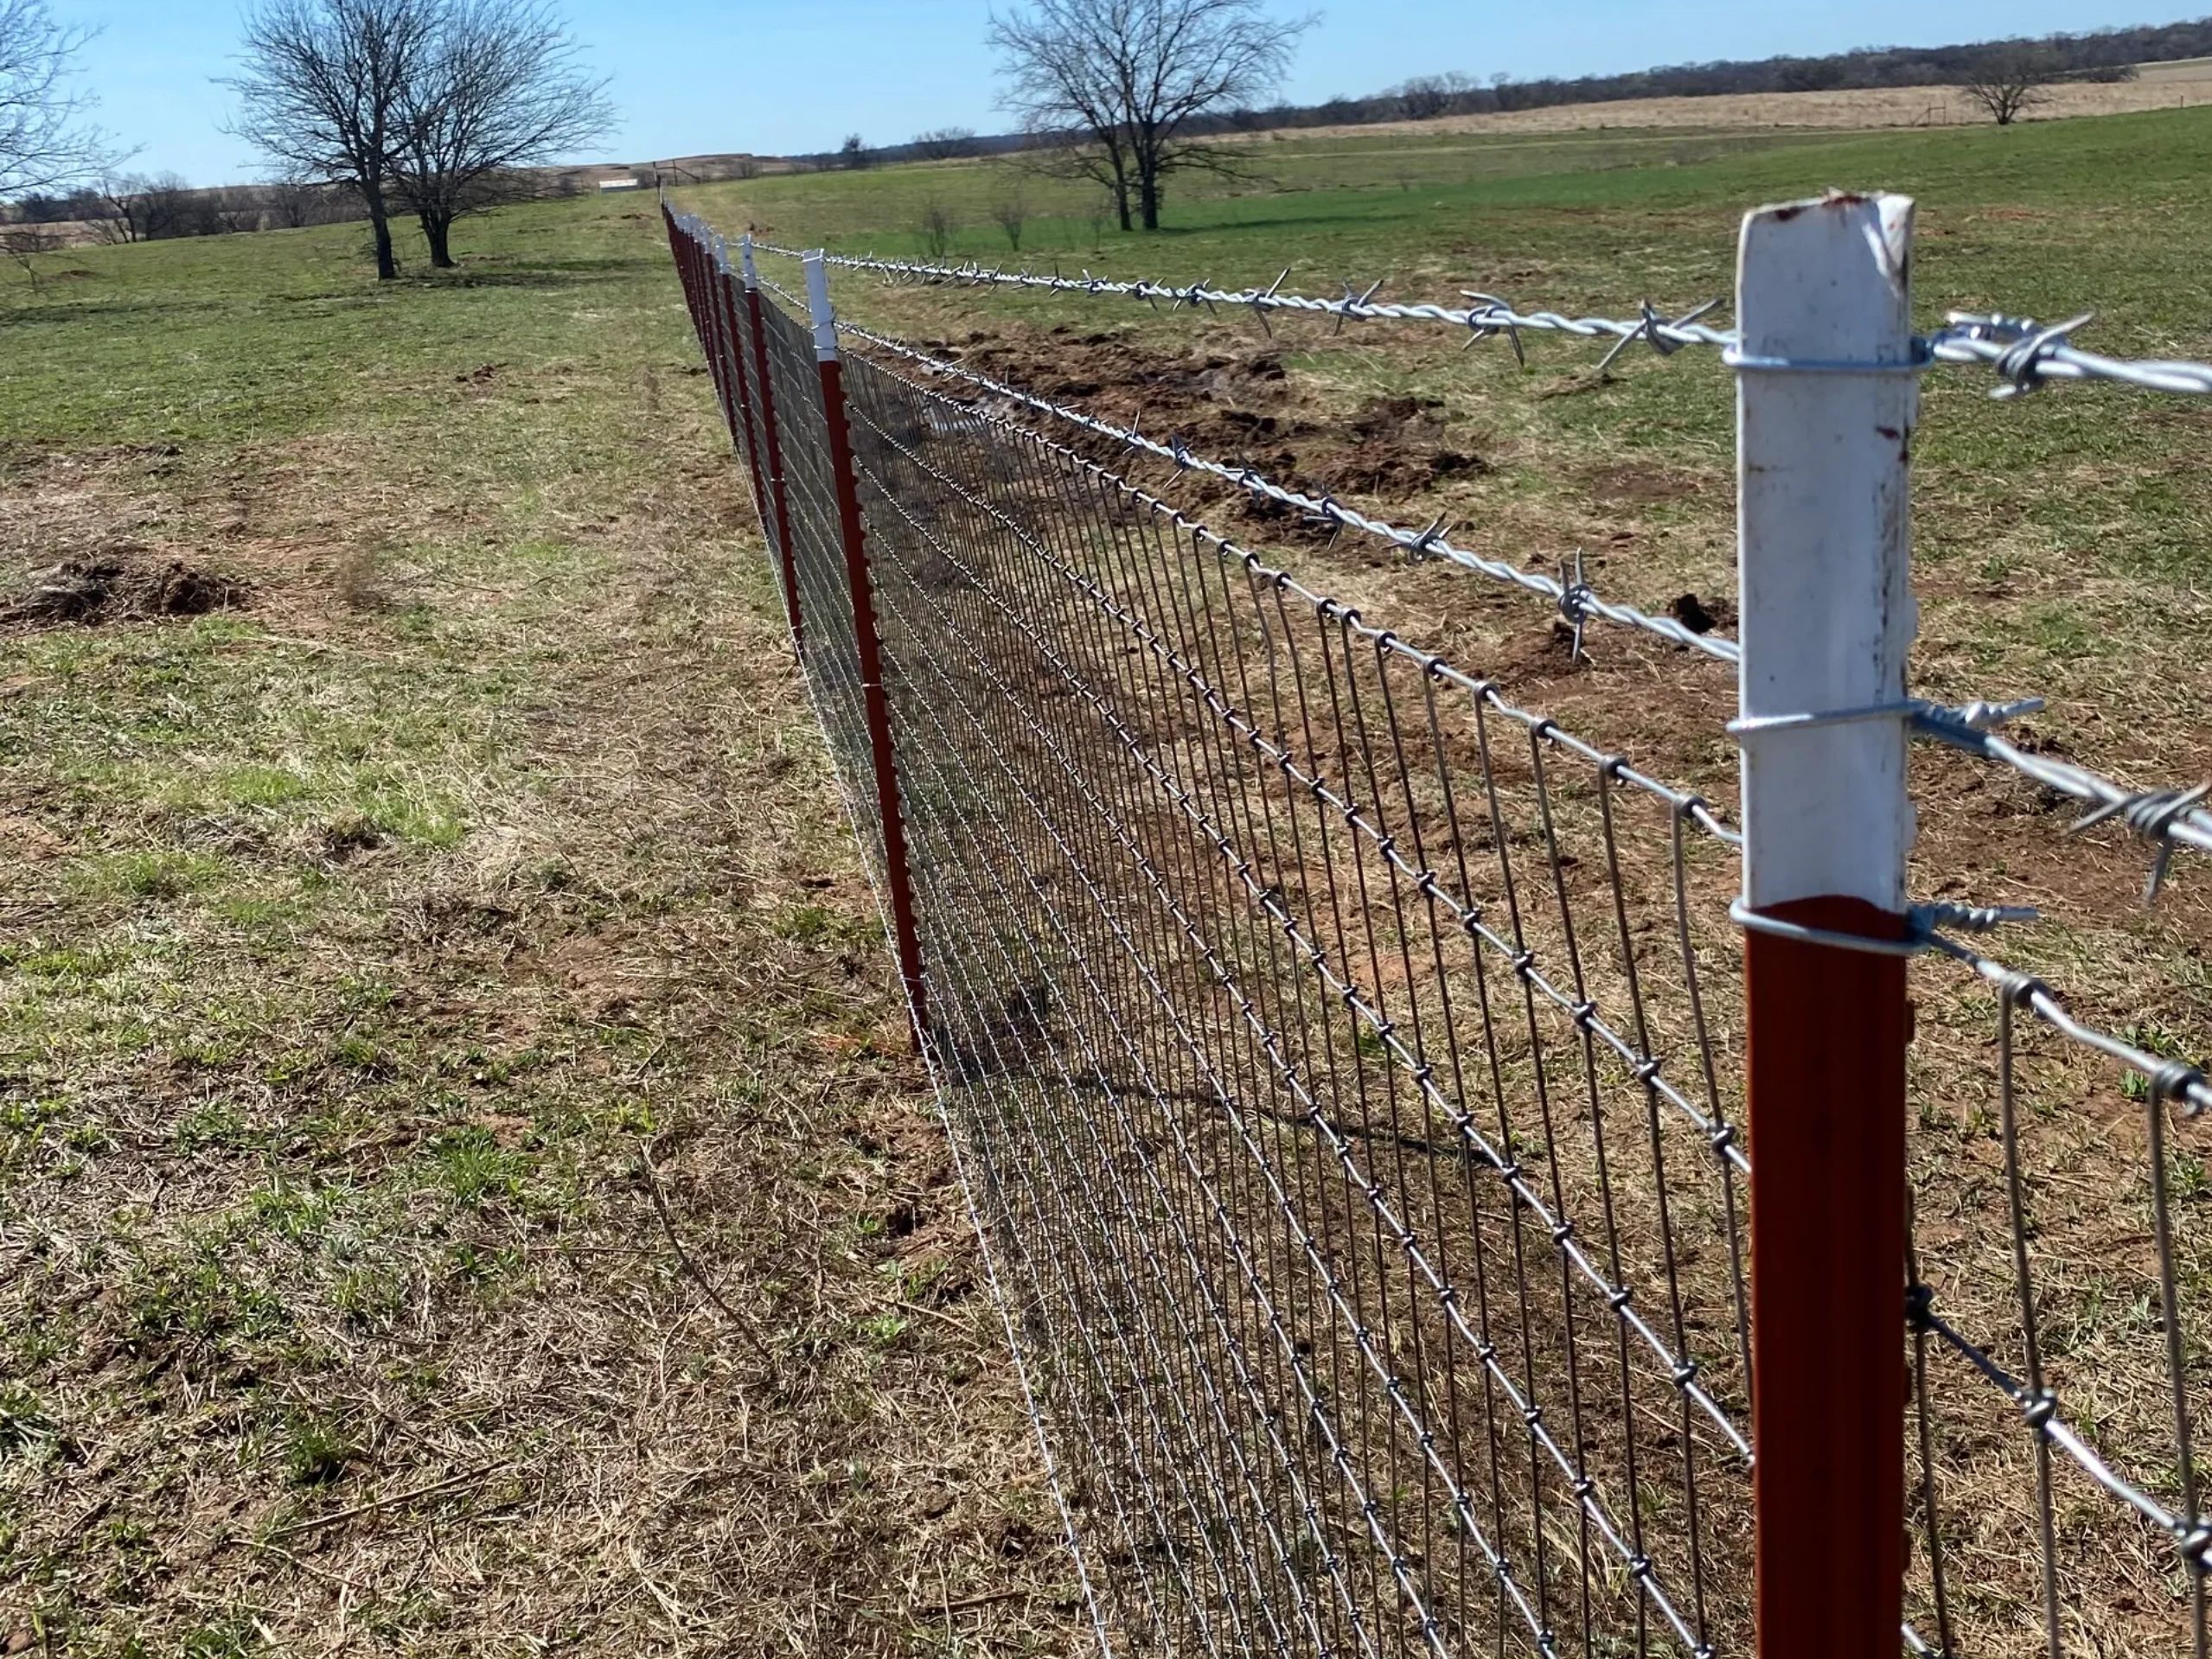 Tpost Fence.

6' tpost and 2"x4" high tensile no-climb with 2 strands of 12.5 ga. 4pt barbed wire.